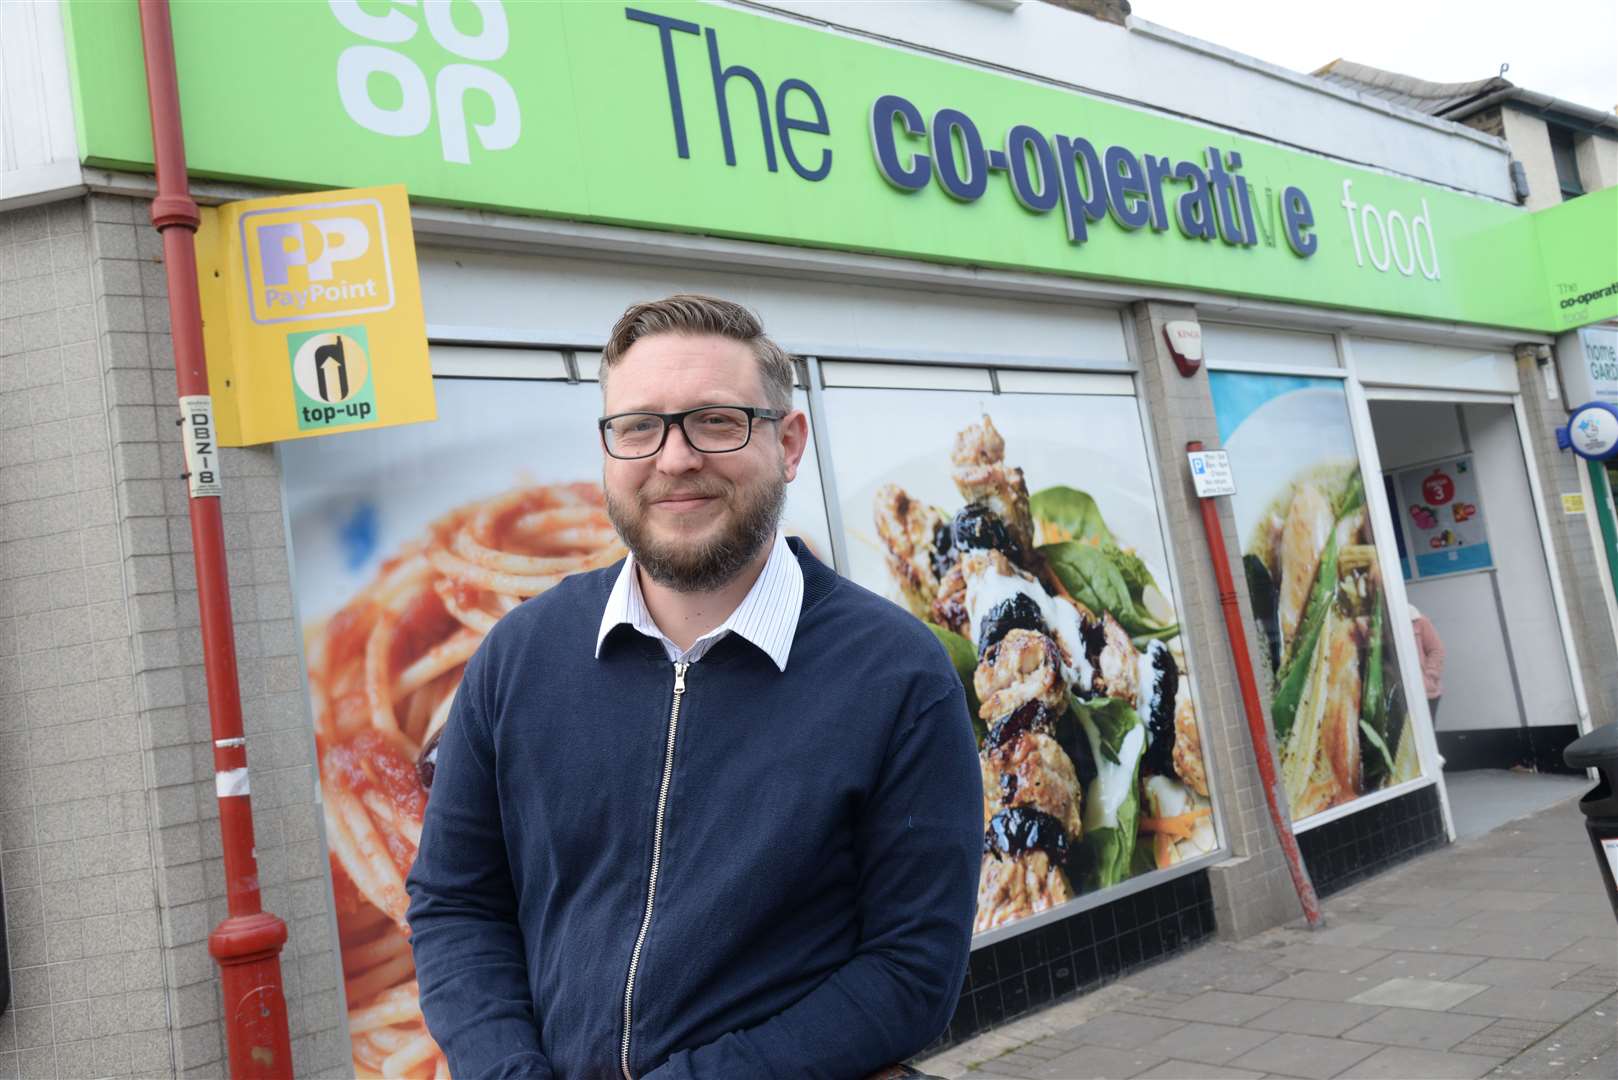 Marc Harris who came to the aid of a woman during an armed robbery in the Delce Road Co-op